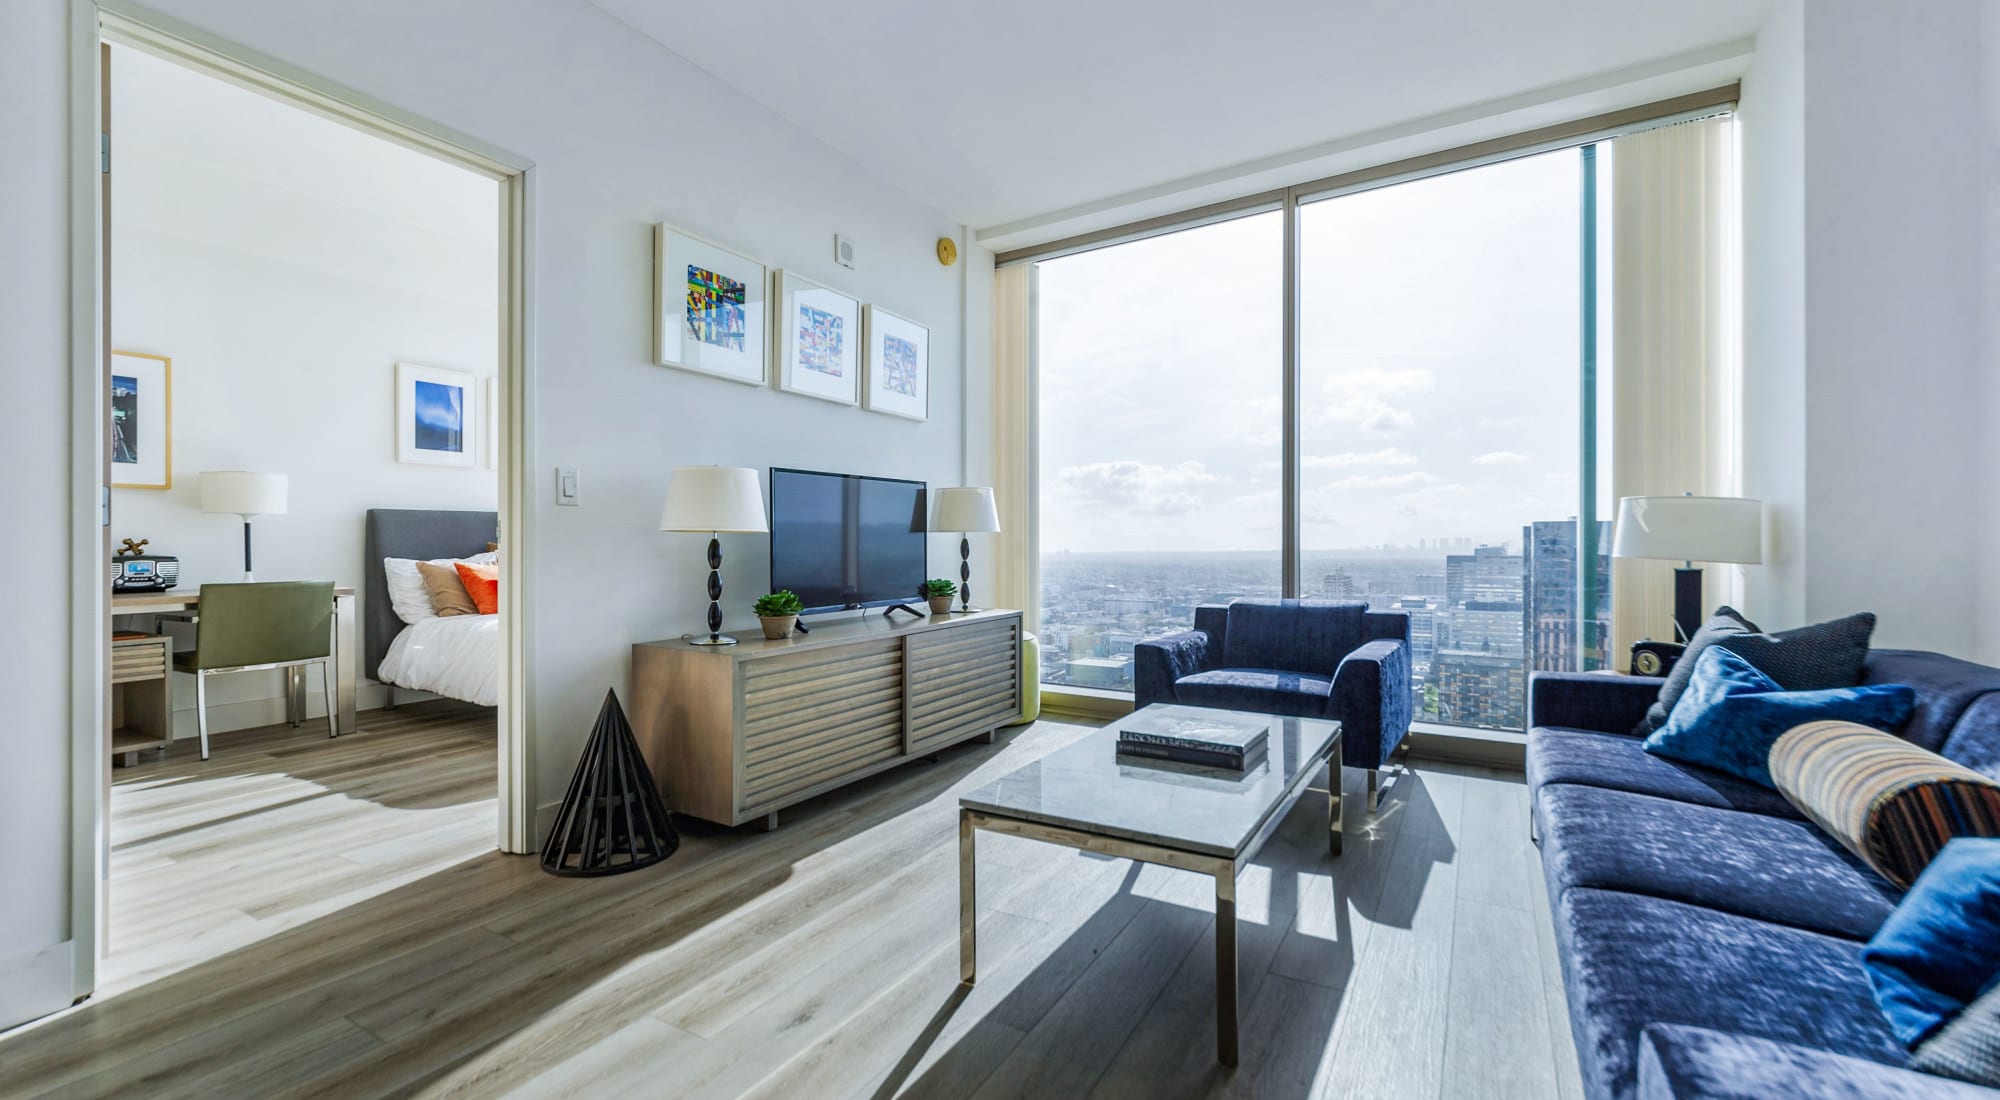 Model apartment with city views at The Vermont in Los Angeles, California